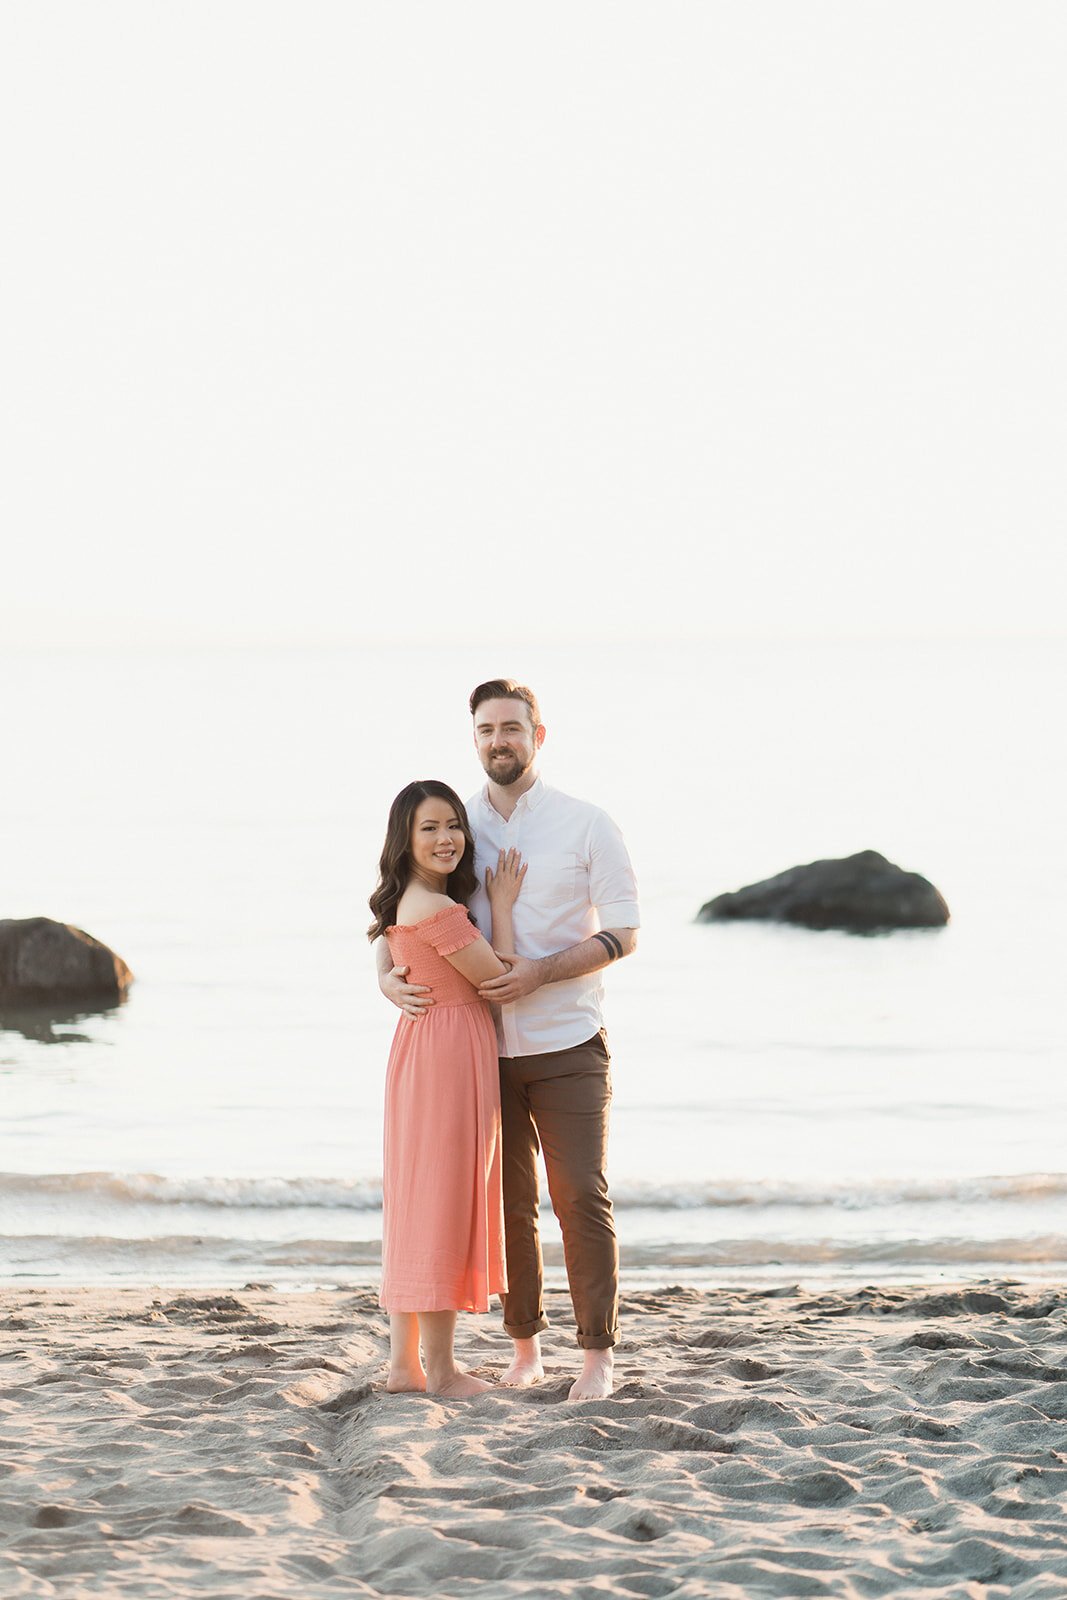 An engaged couple stand on a soft sandy beach lit by a gorgeous sunset.